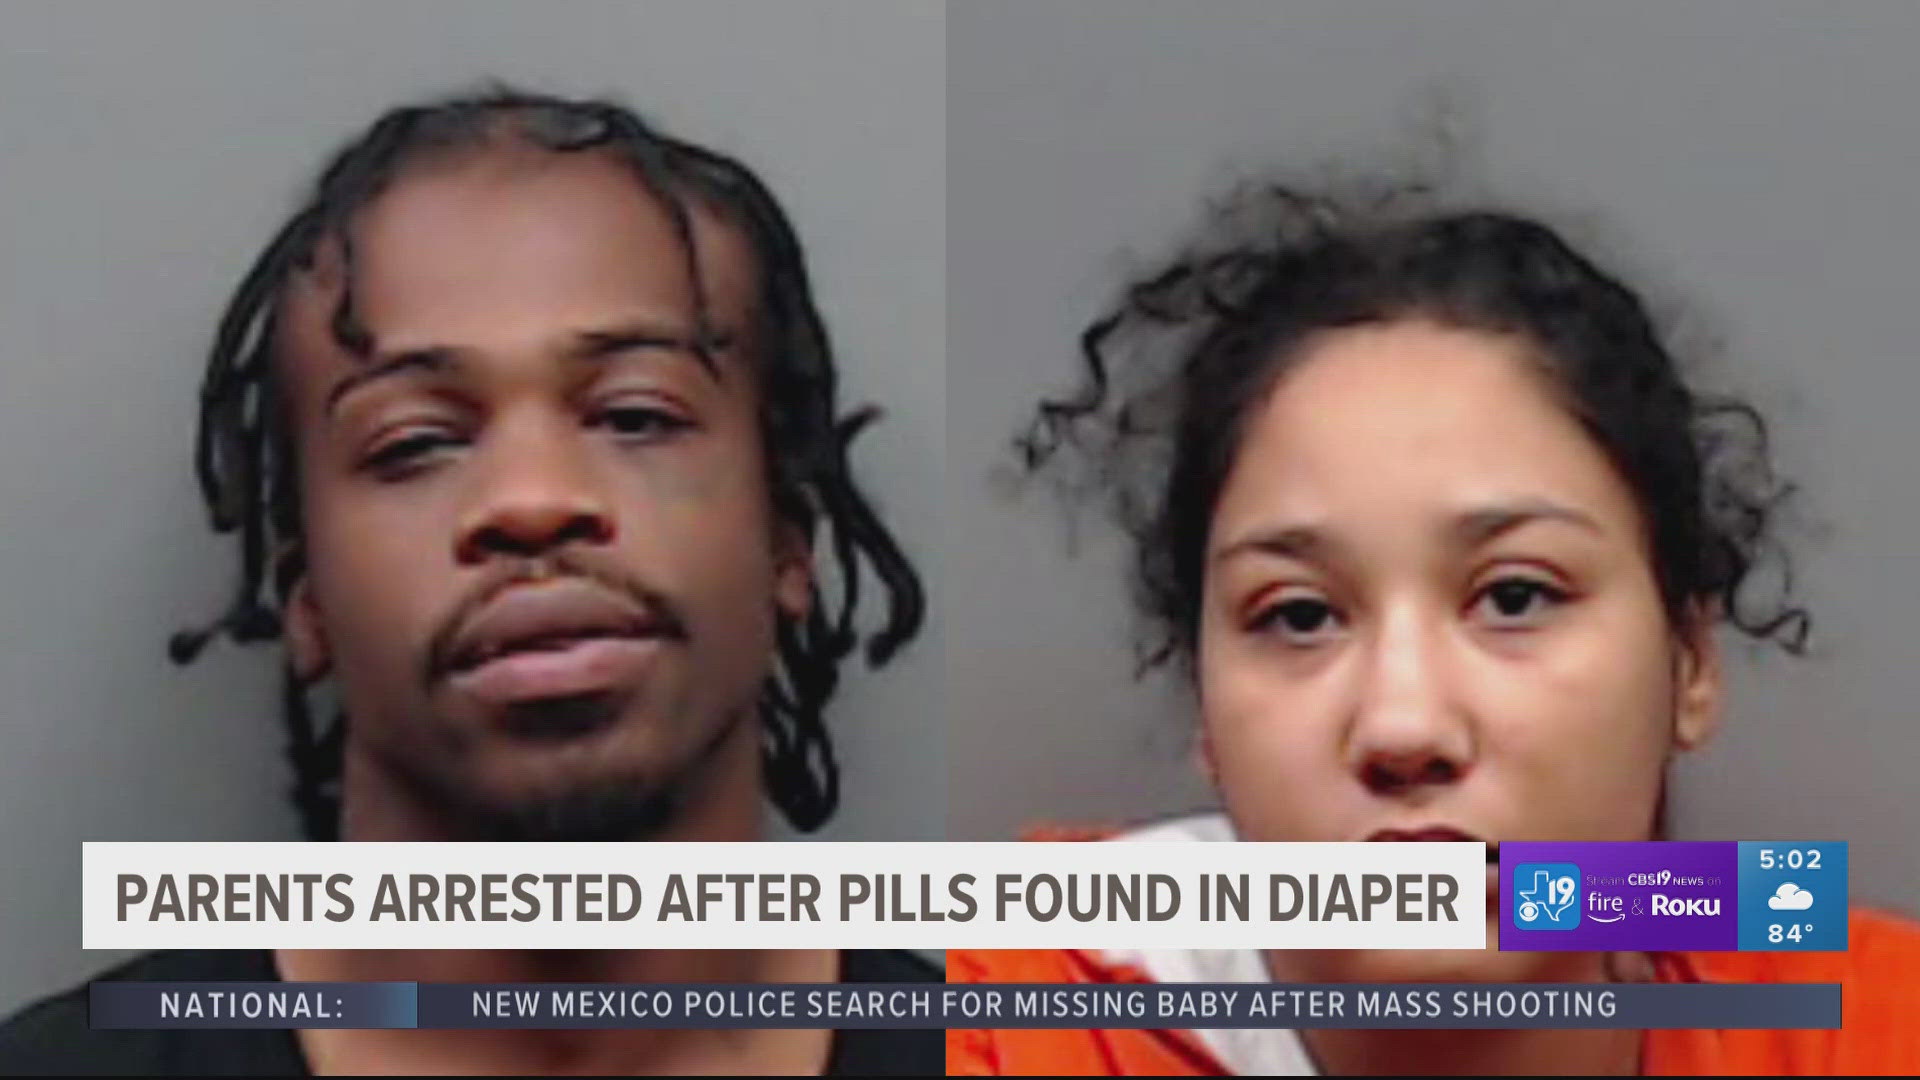 The child's father admitted to placing the pills into the diaper, the SCSO said.